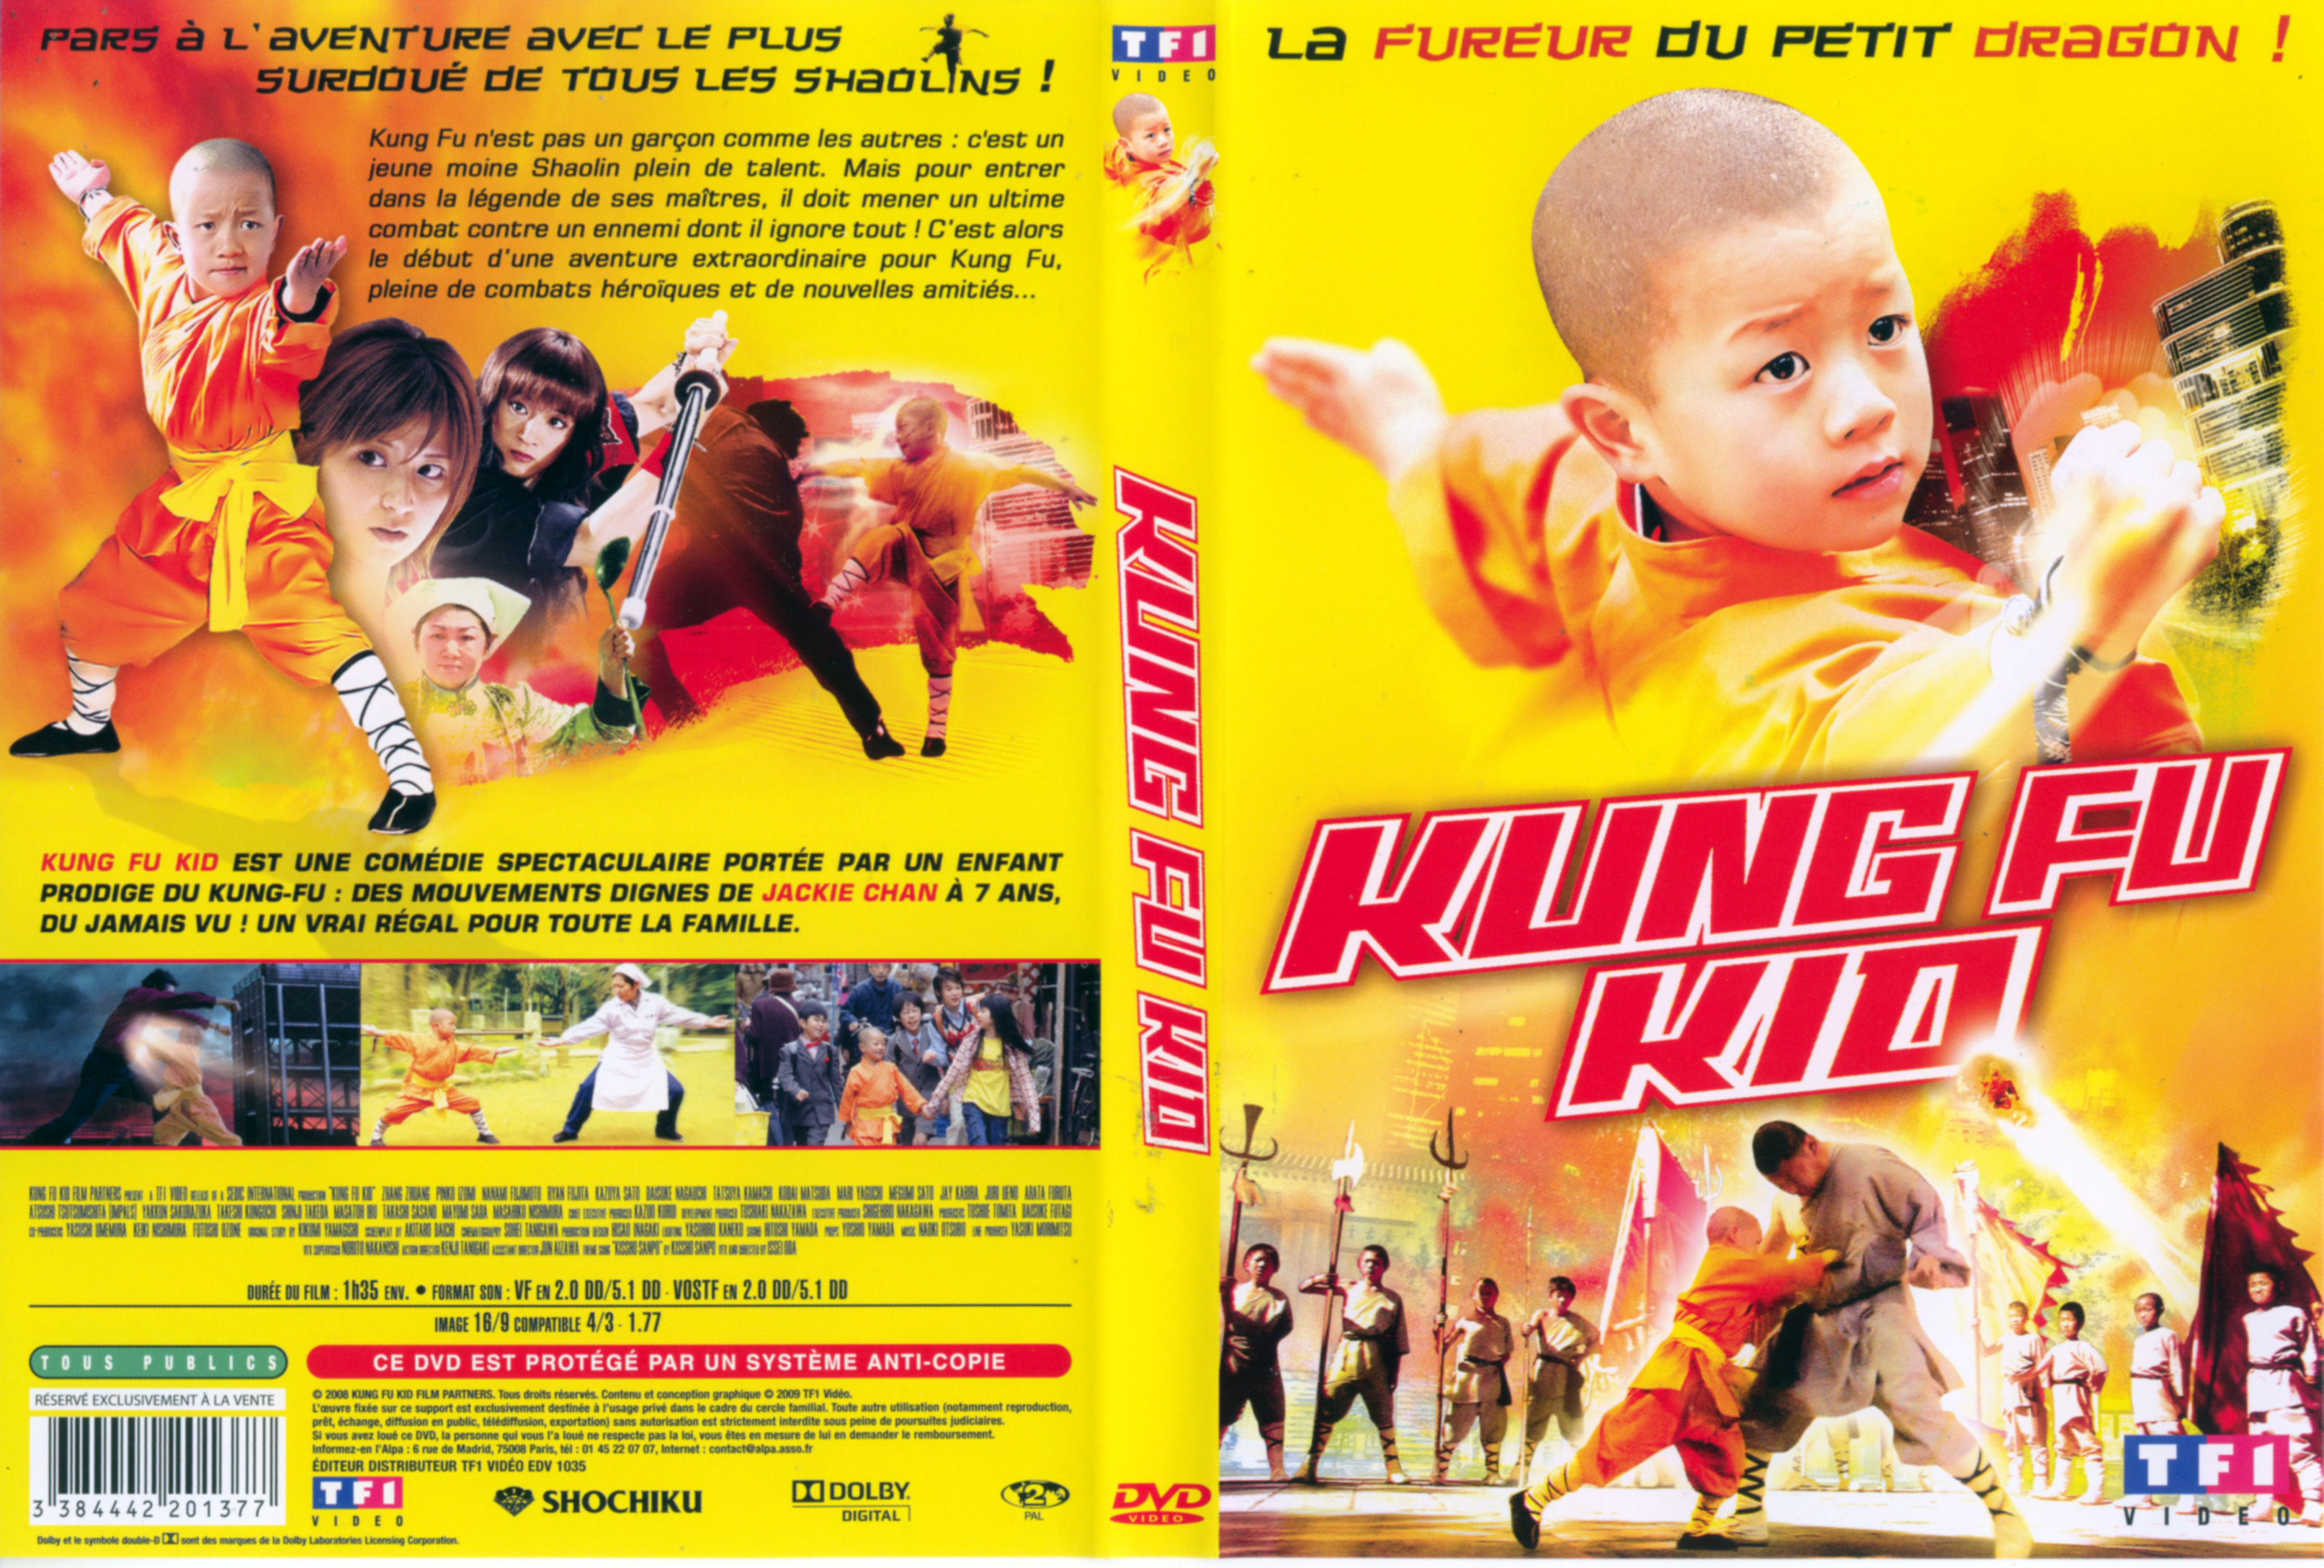 Jaquette DVD Kung fu kid